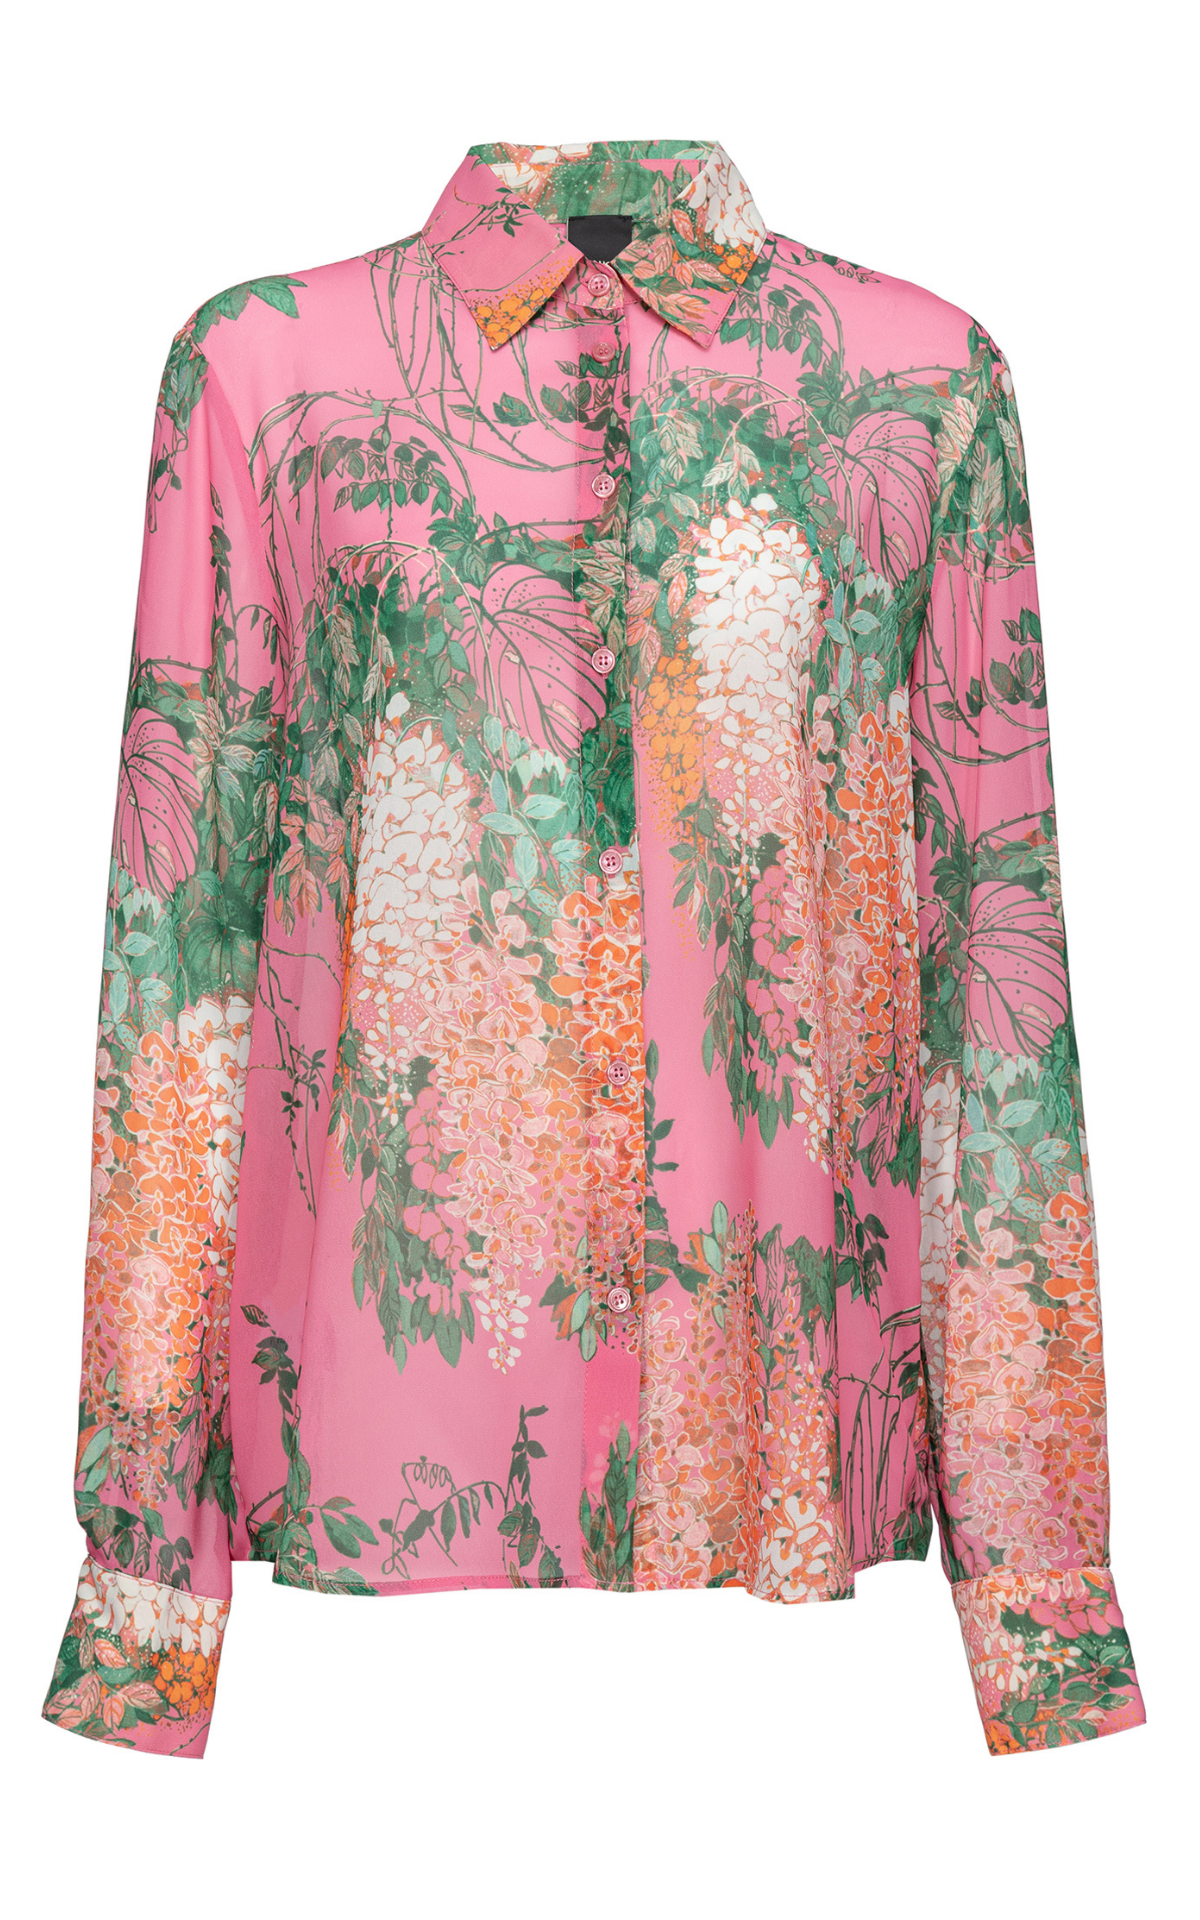 Georgette shirt with floral print